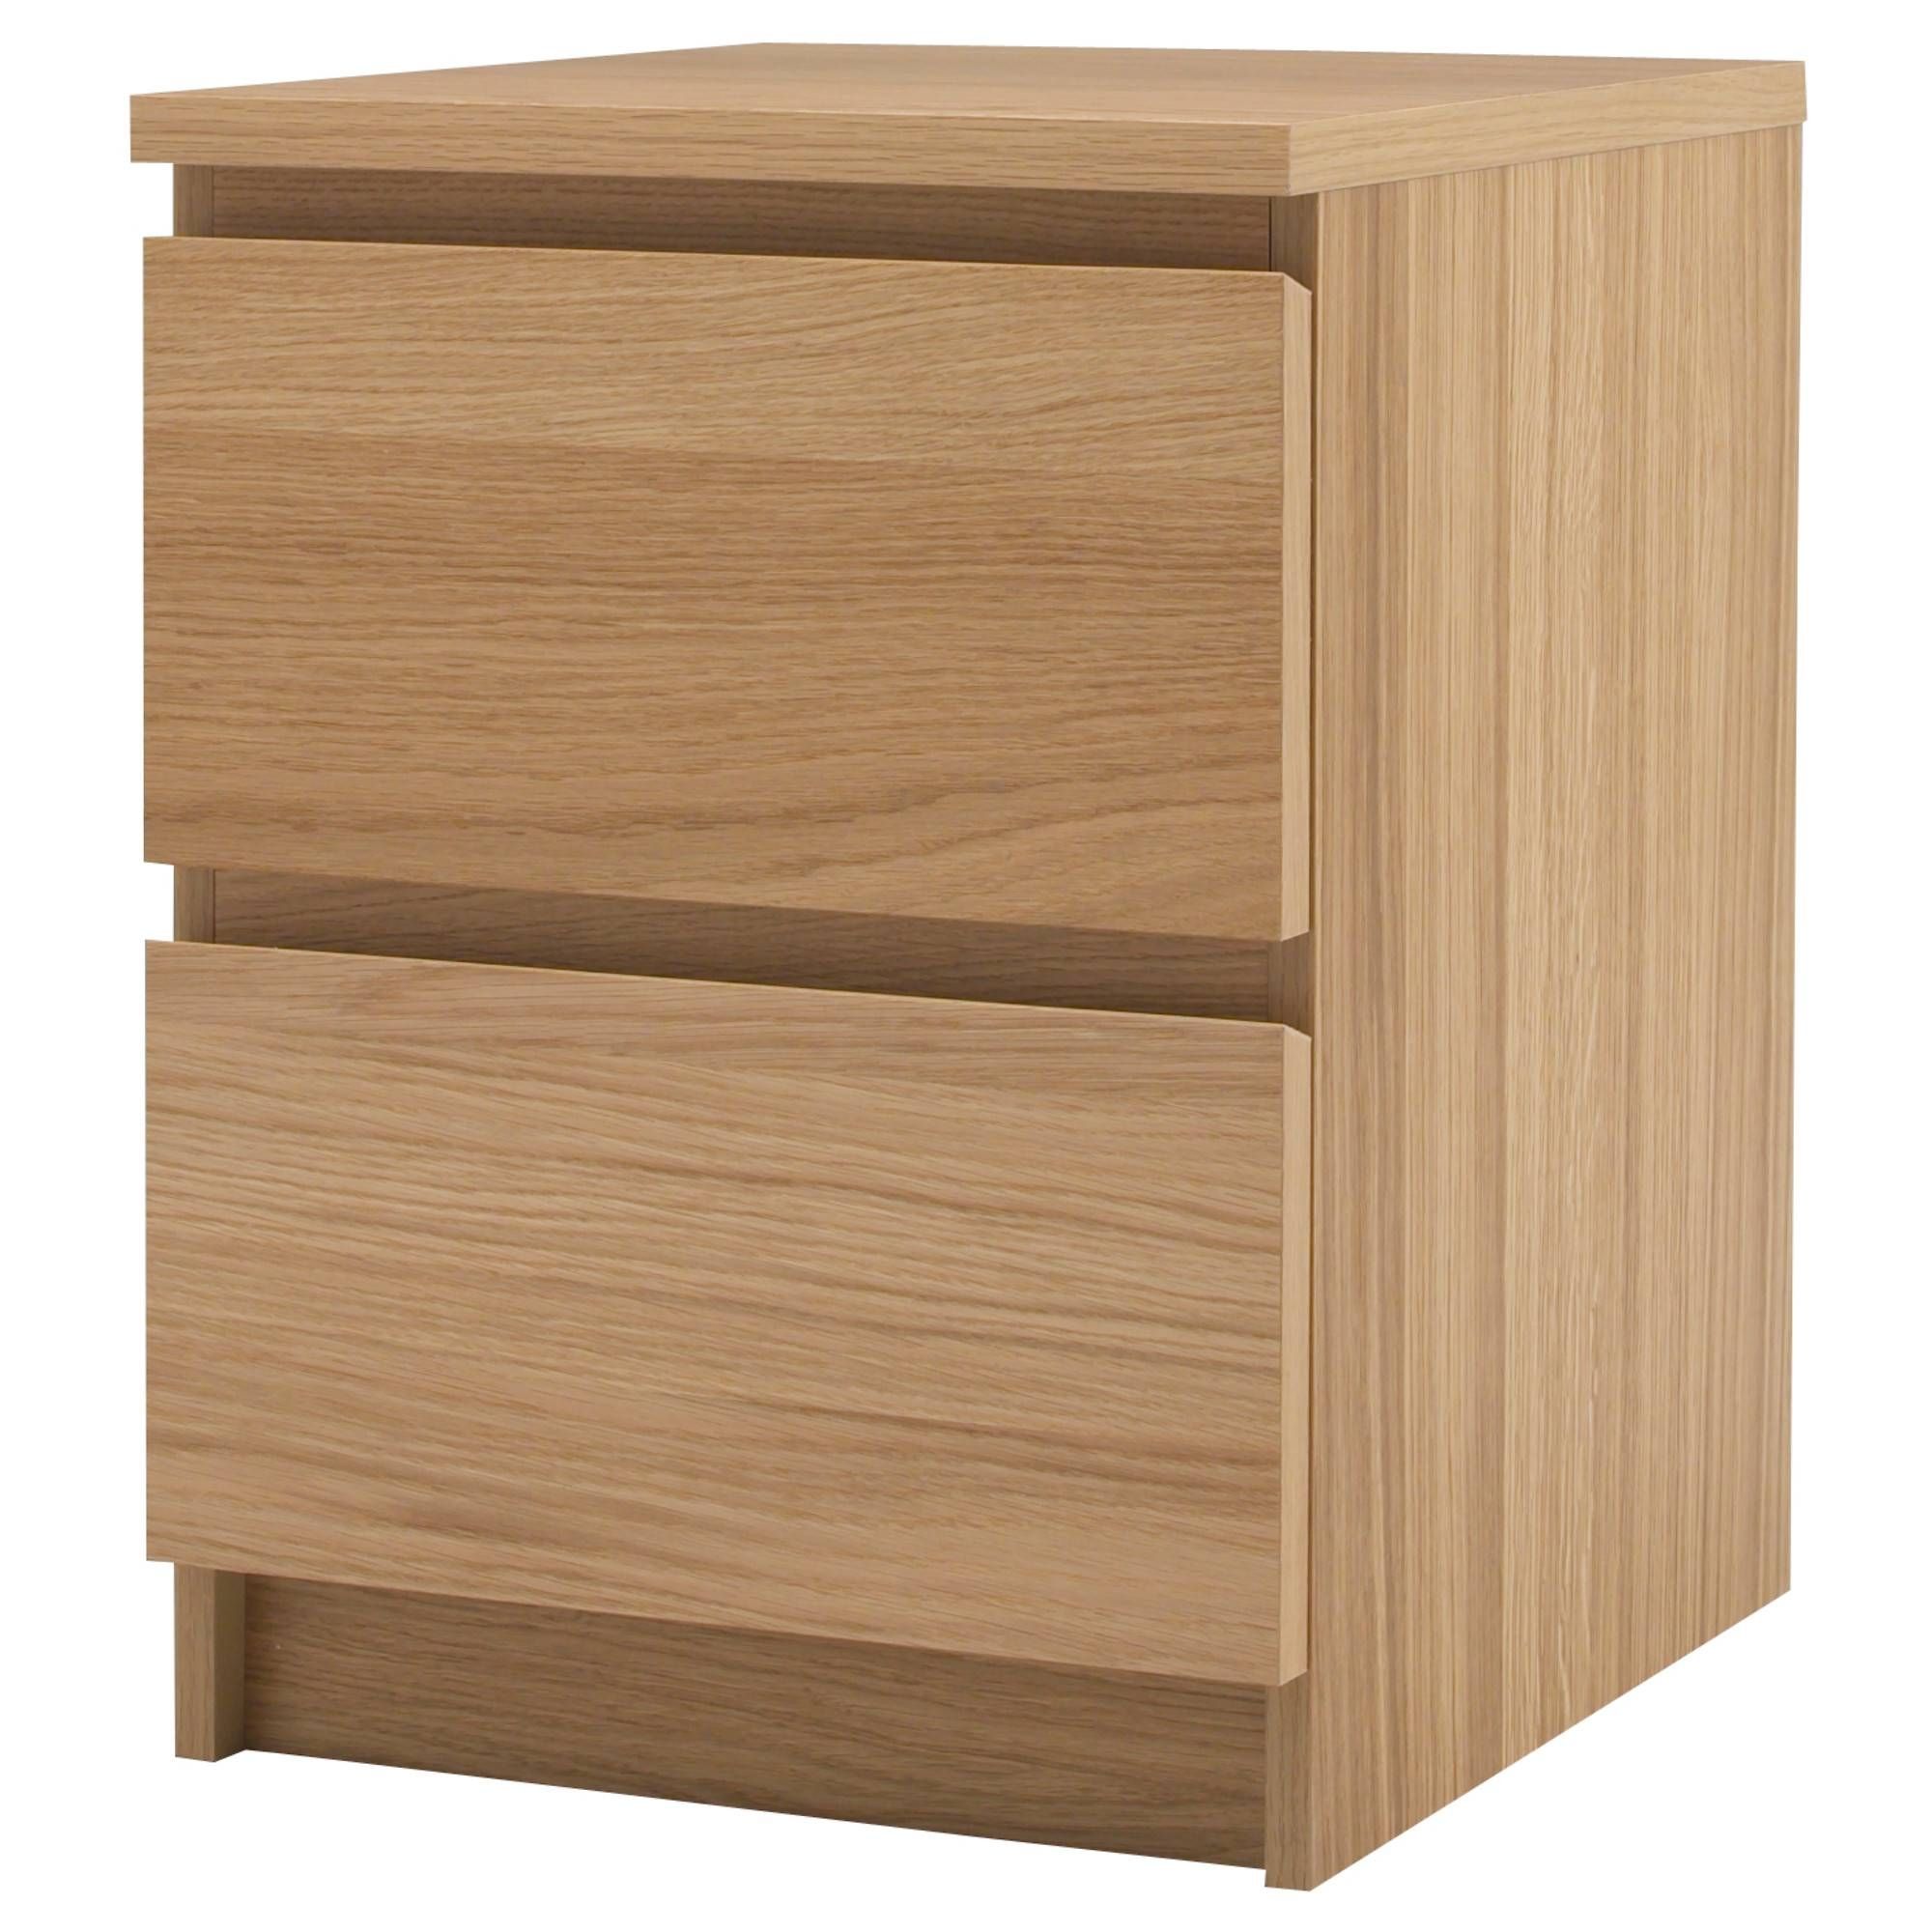 Malm – Ikea Pertaining To Oak Wardrobe With Drawers And Shelves (View 28 of 30)